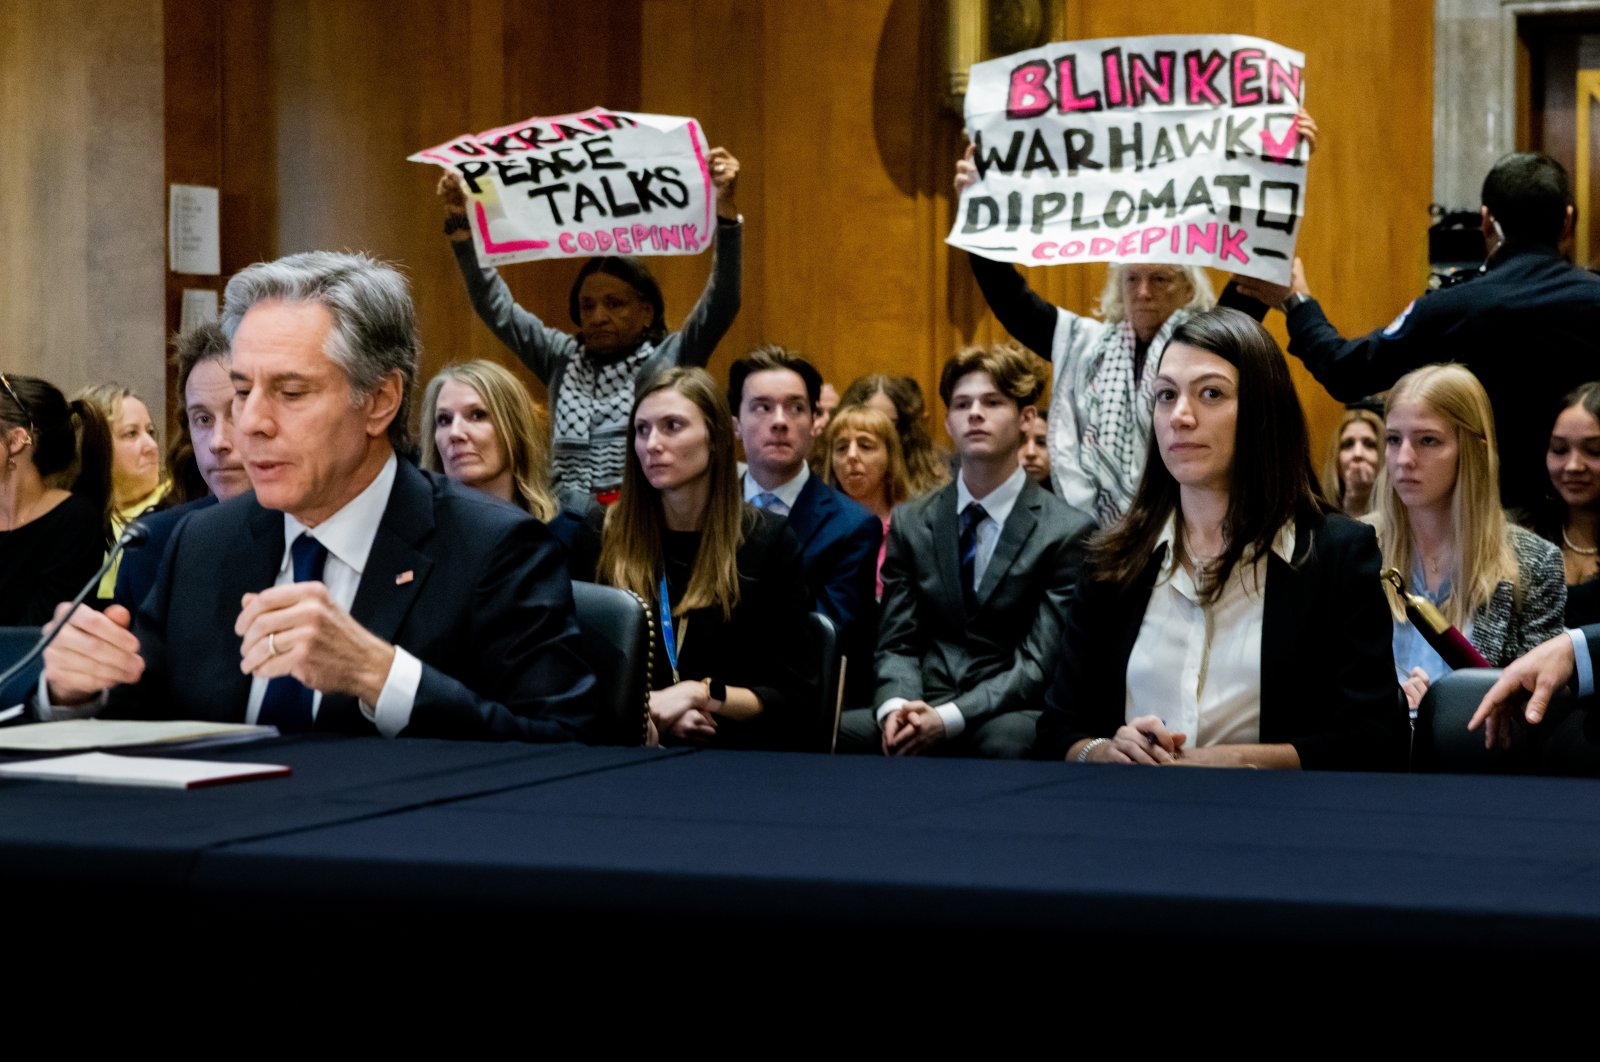 Protesters hold placards during testimony from U.S. Secretary of State Antony Blinken in Washington, D.C., U.S., March 22, 2023. (AFP Photo)